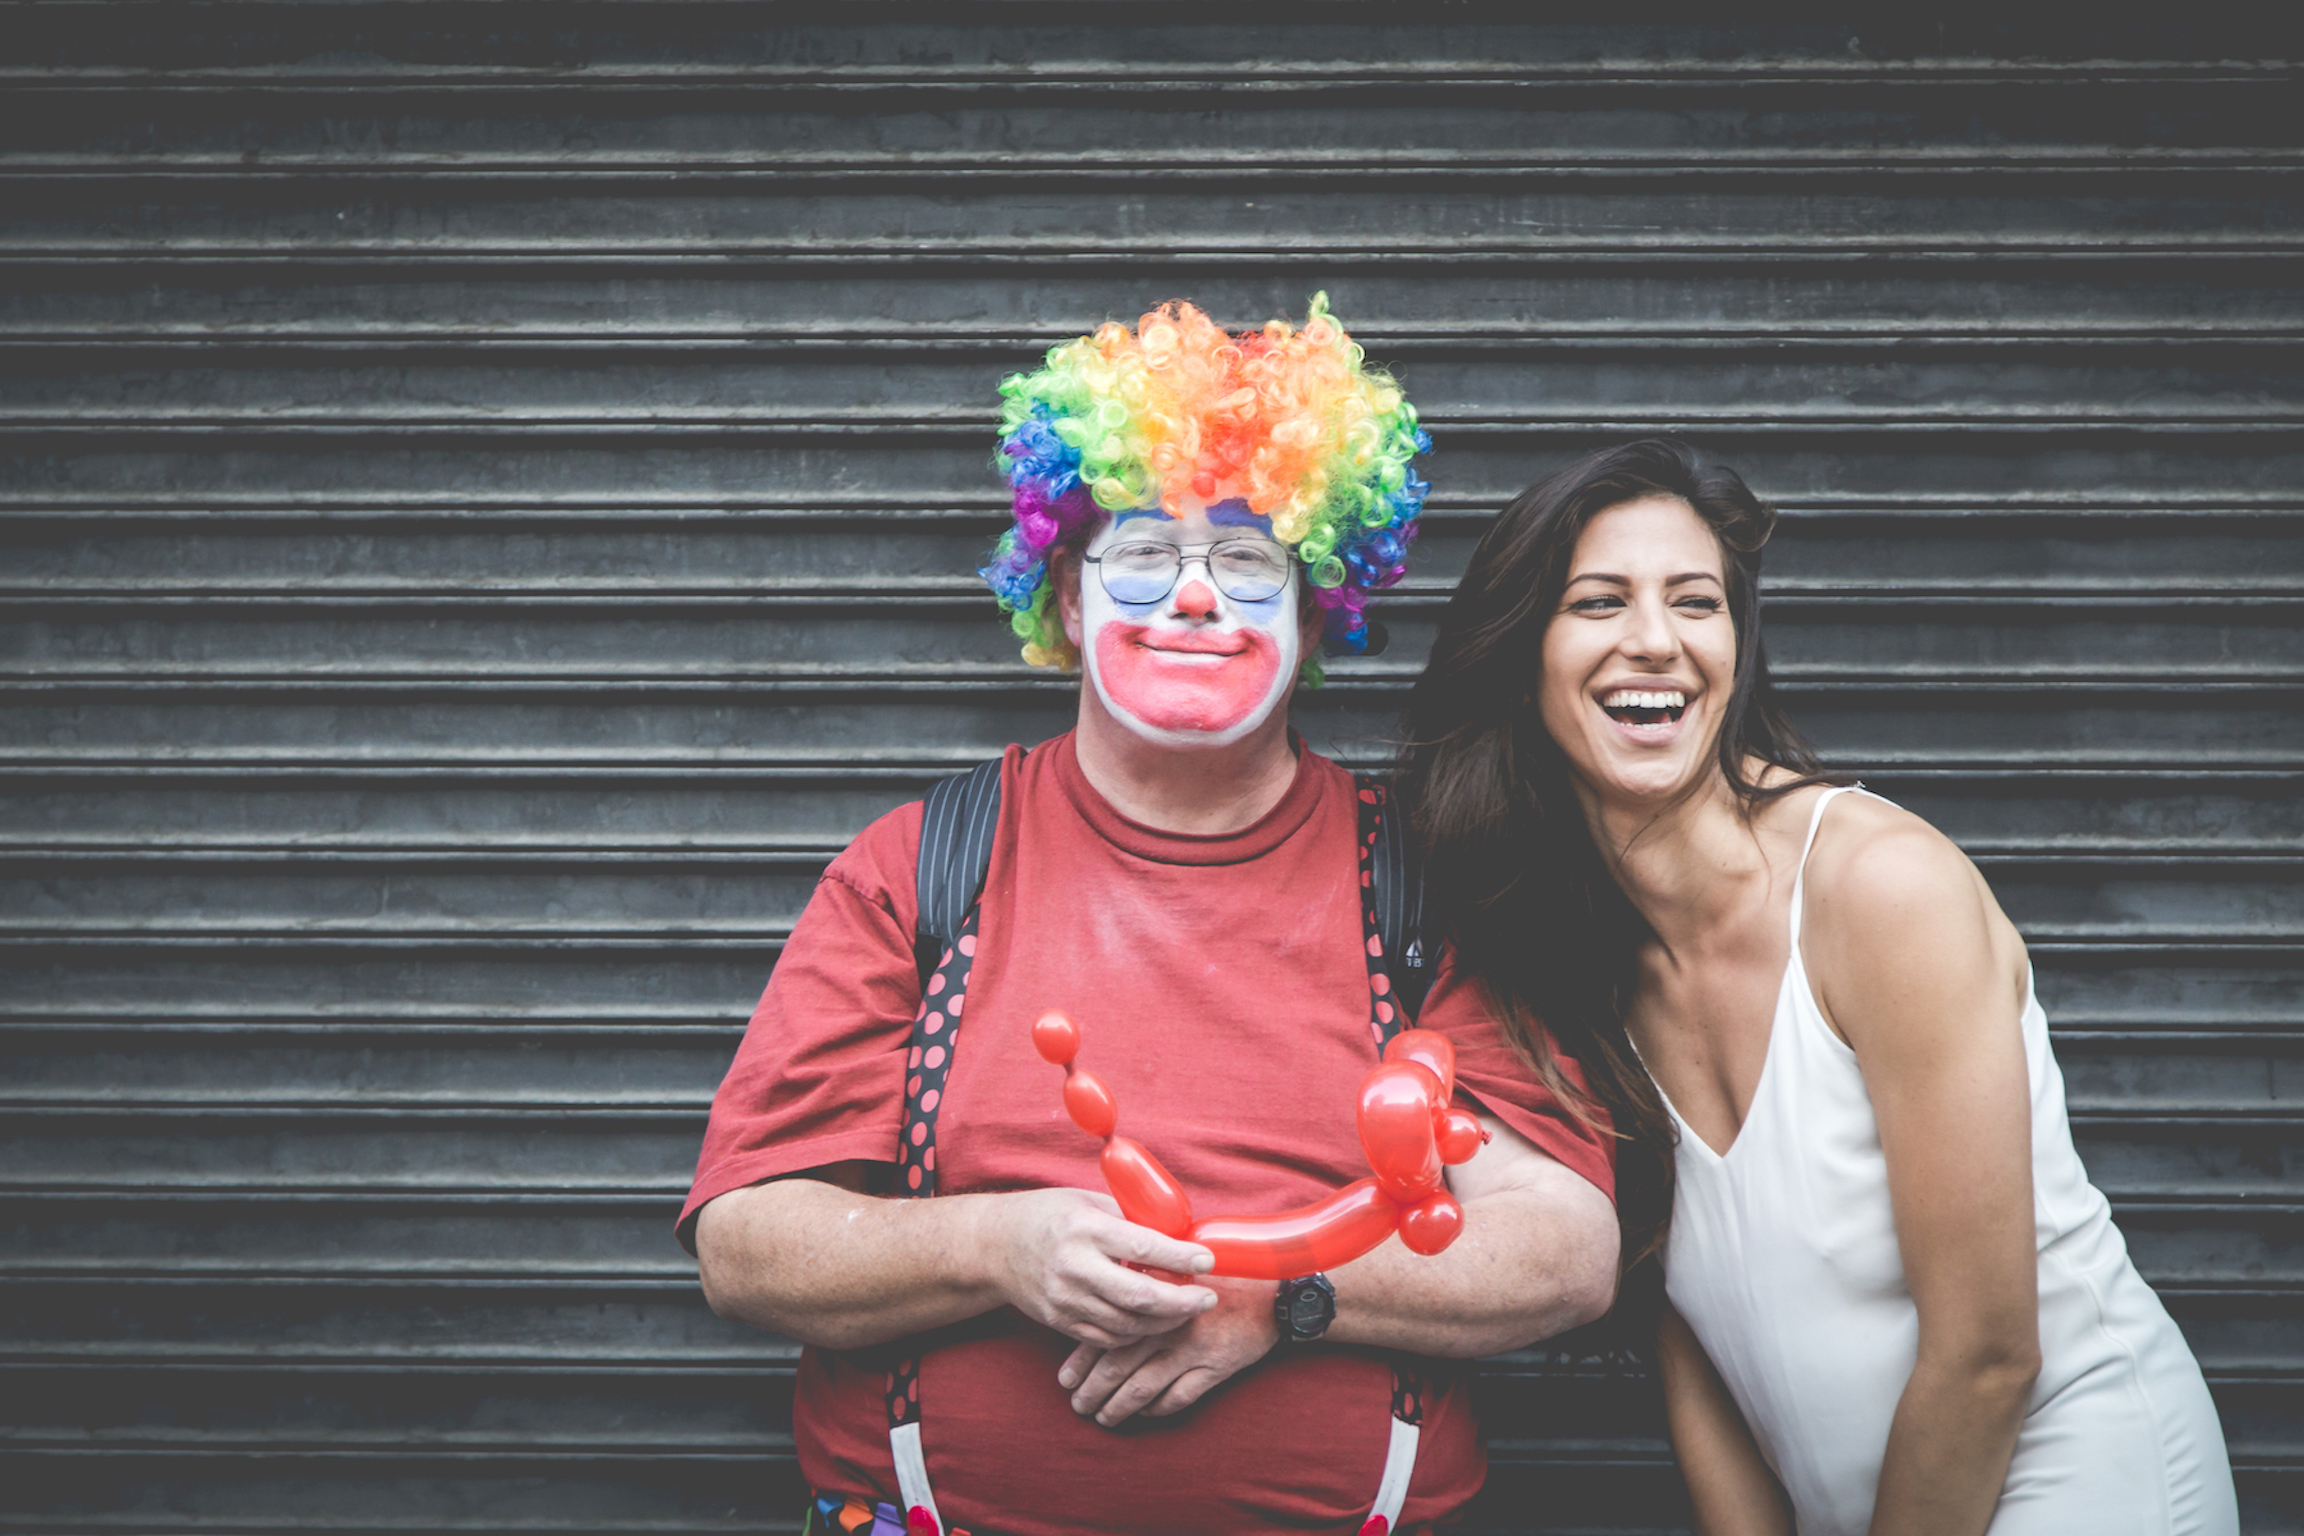 man dressed as a clown standing with a woman